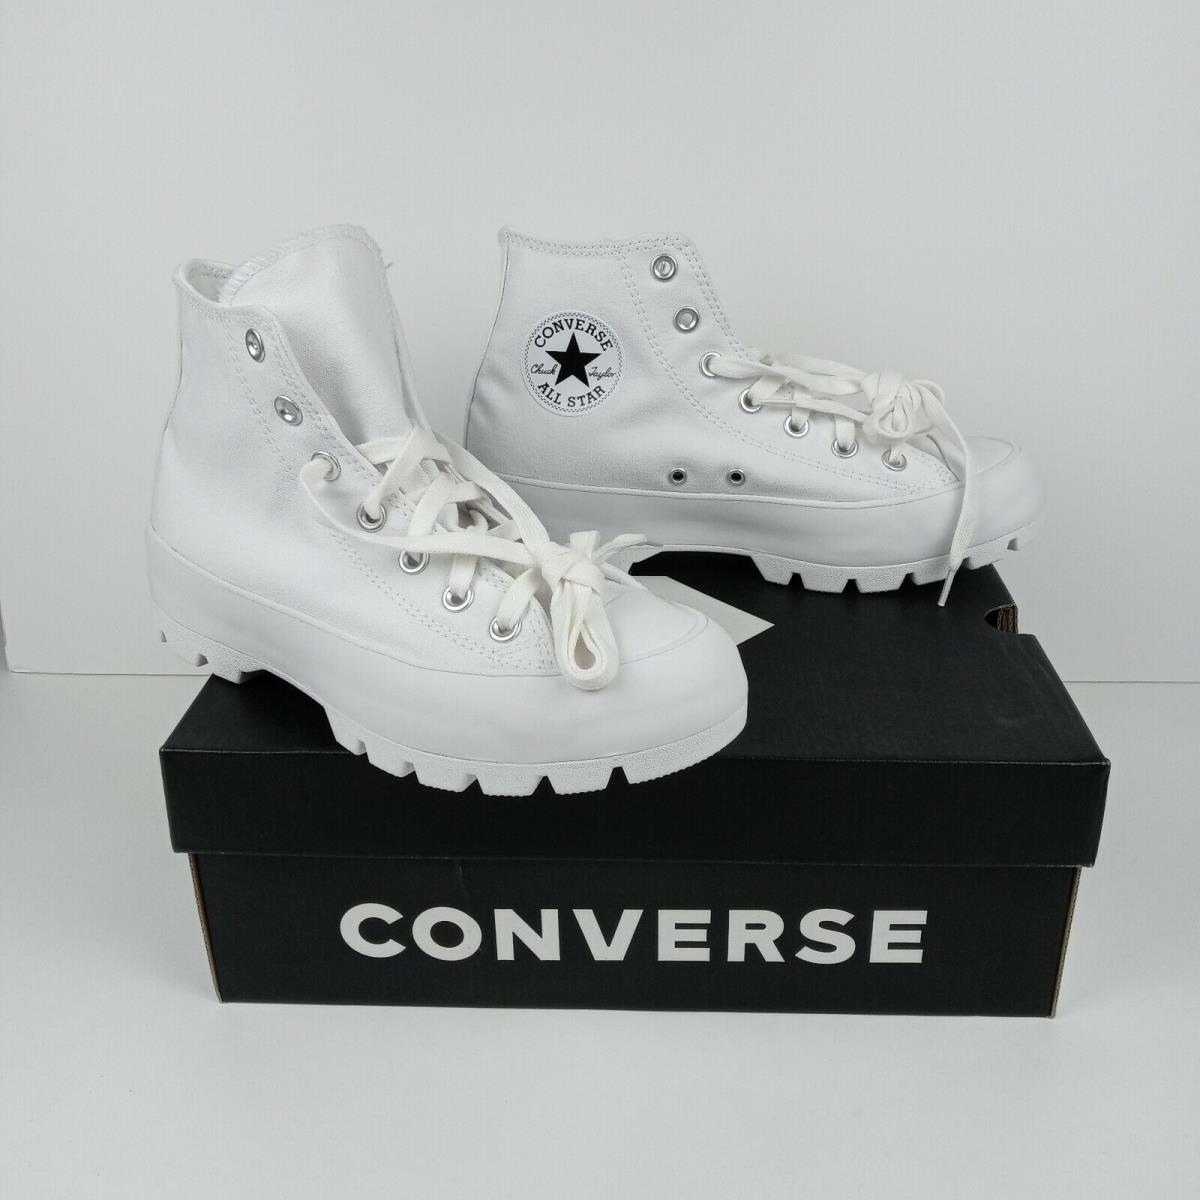 Converse Chuck Taylor All Star Hi Lugged High Top White Shoes 565902C Women`s 7